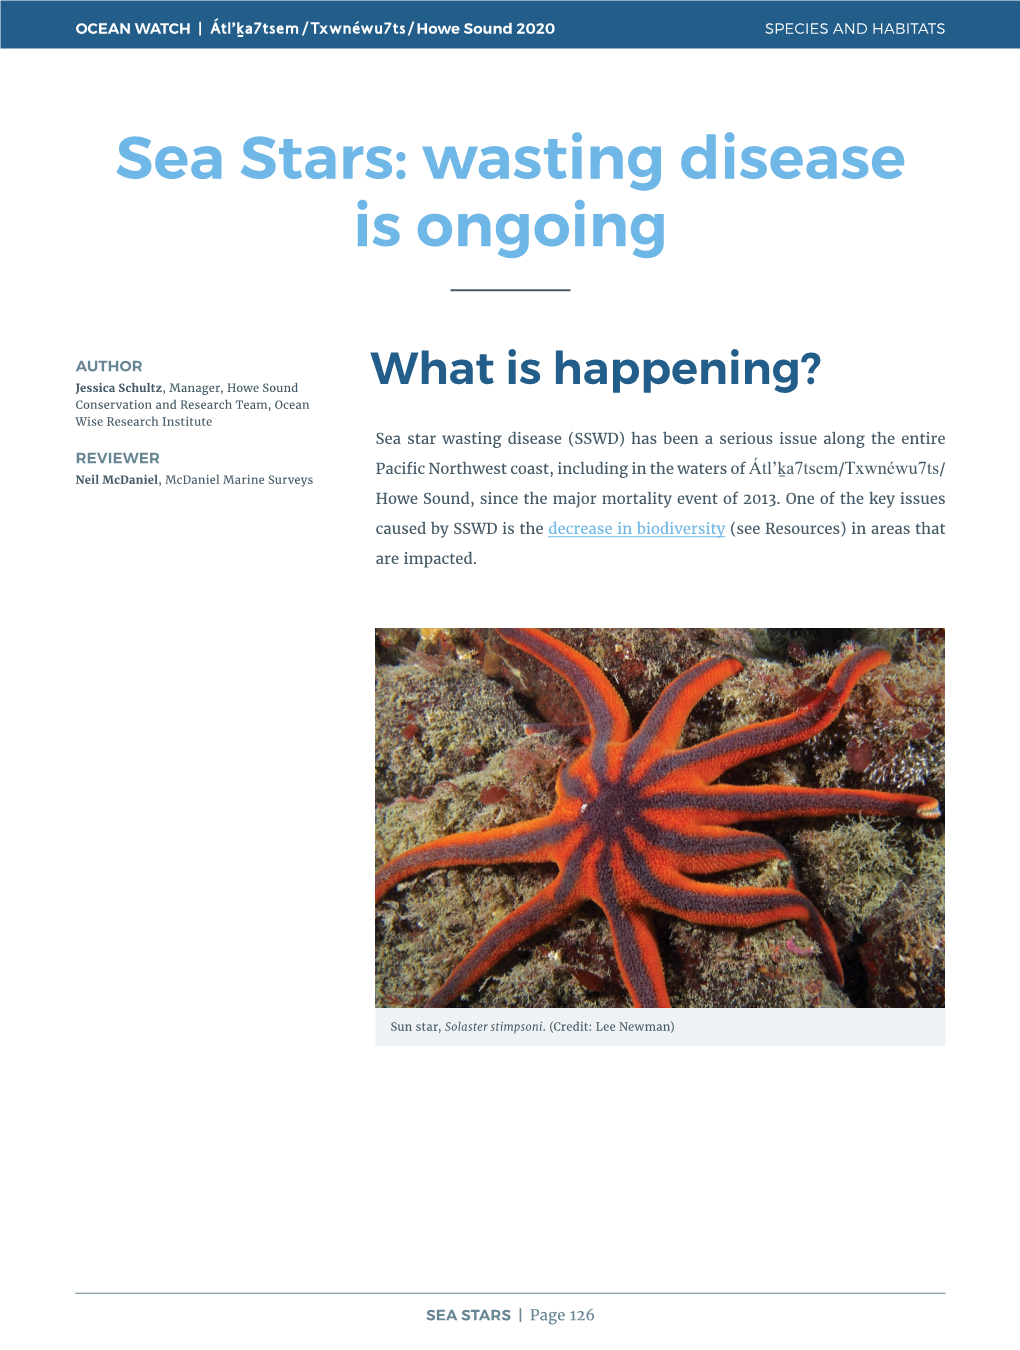 Sea Stars: Wasting Disease Is Ongoing